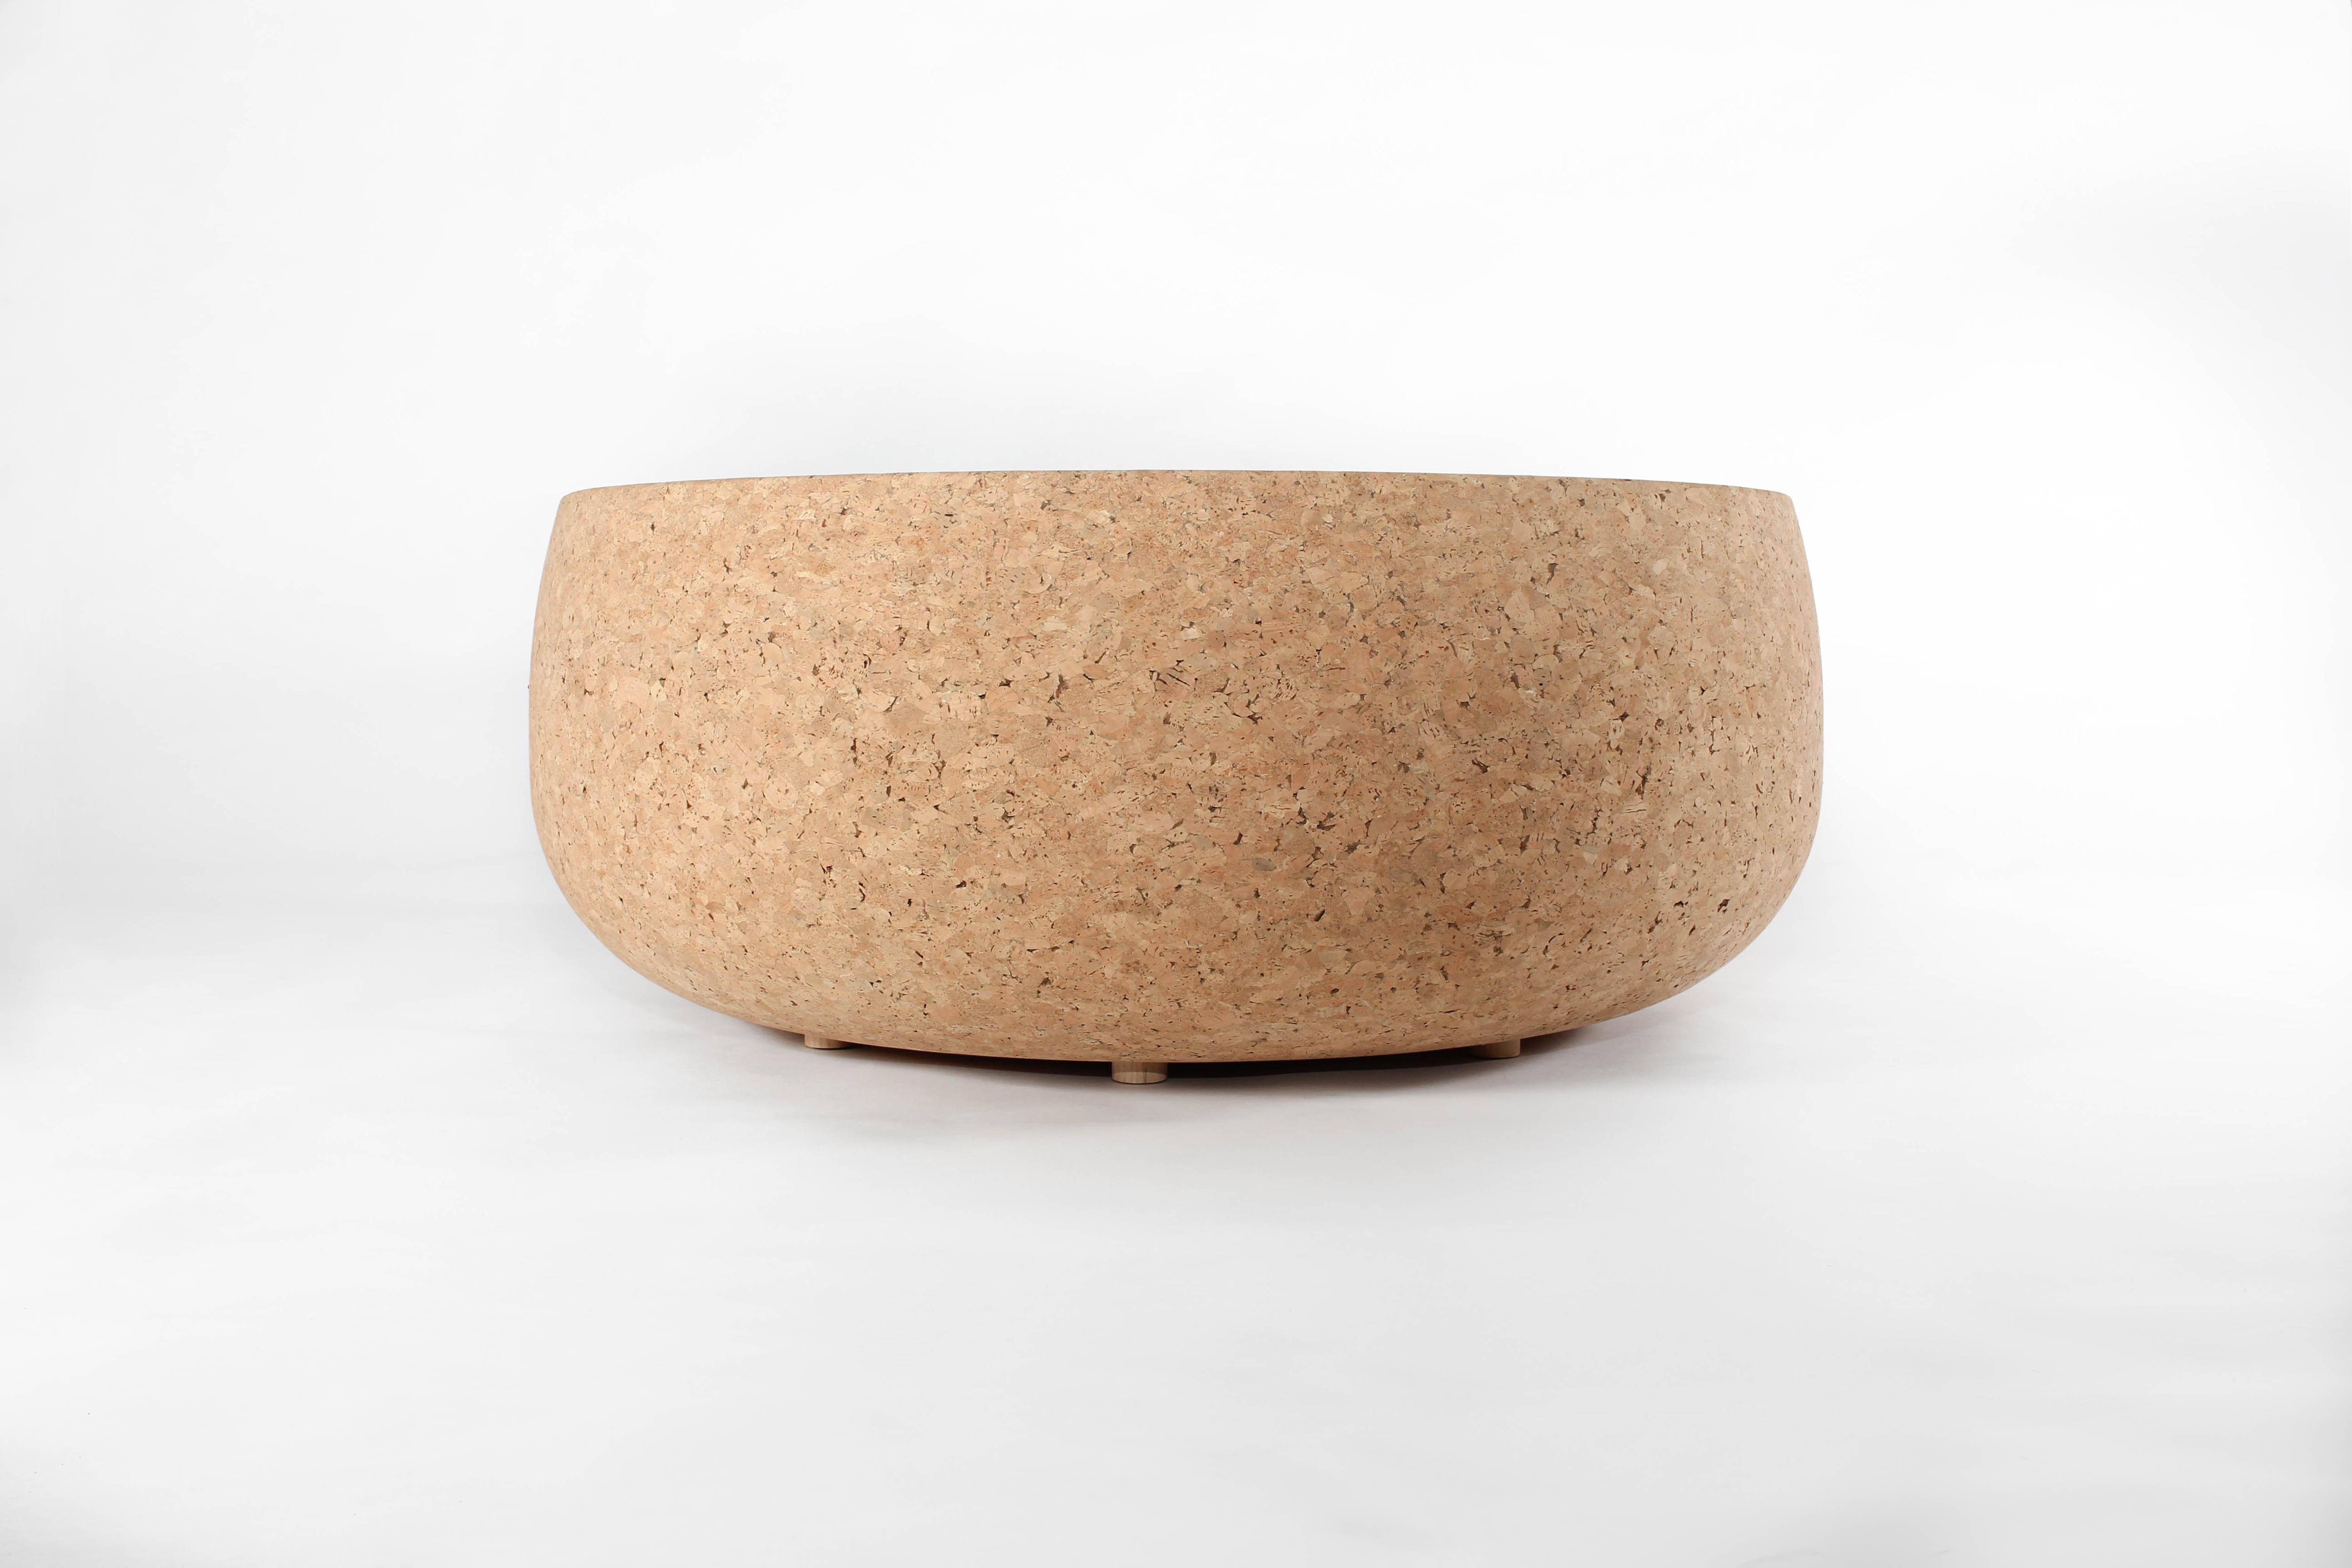 American Doughnut Solid Cork Contemporary Sculptural Carved Coffee Table Bench Natural For Sale